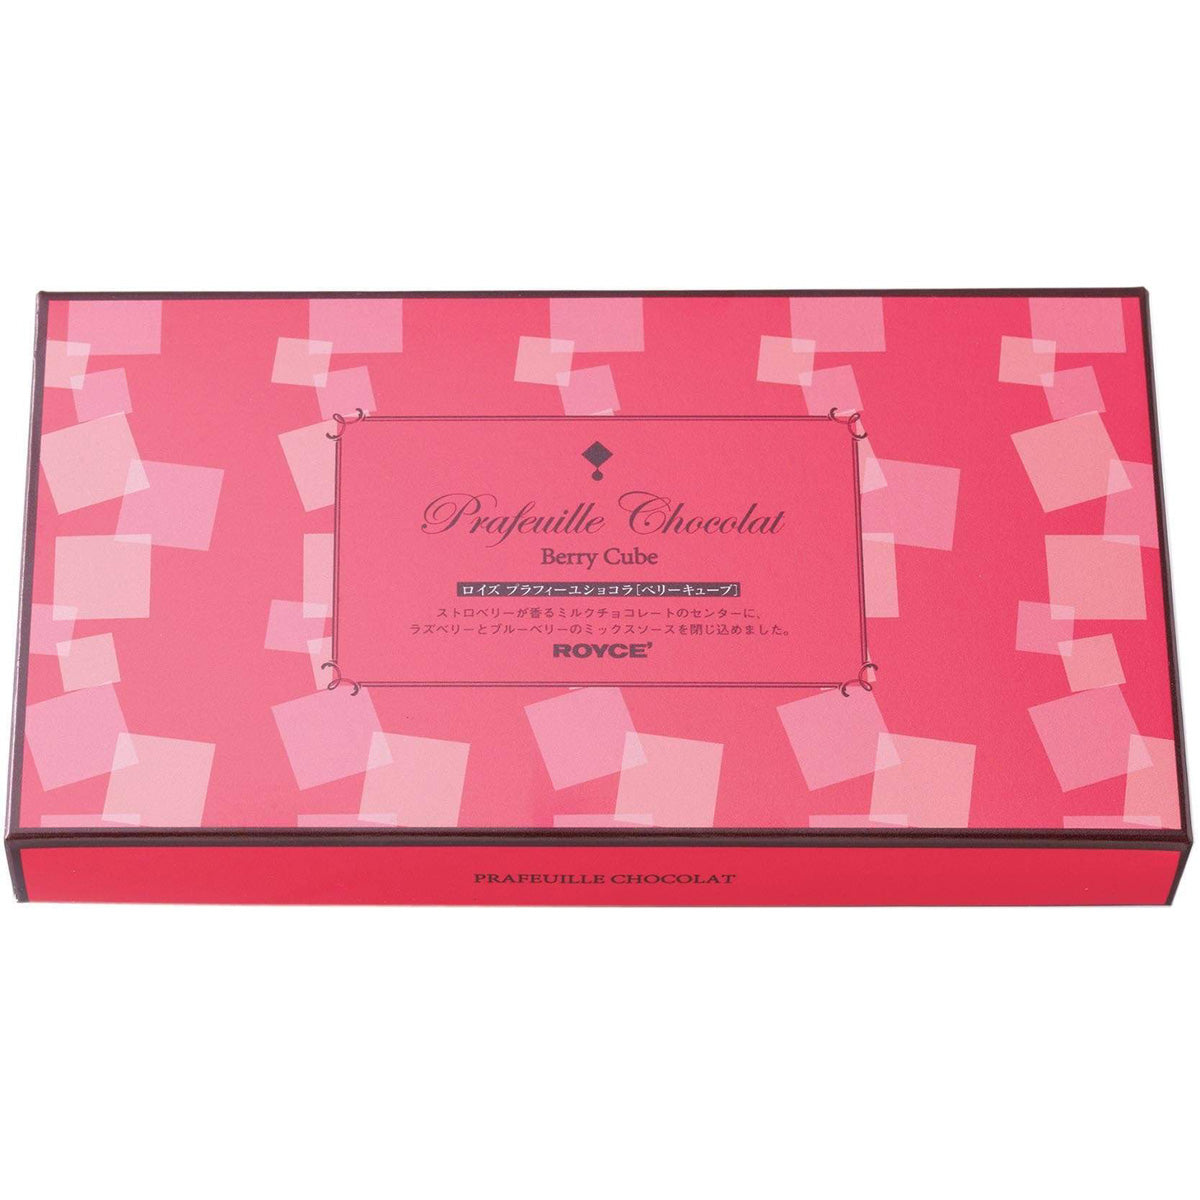 ROYCE' Chocolate - Prafeuille Chocolat "Berry Cube" - Image shows a pink box with cube prints. Text says Prafeuille Chocolat Berry Cube ROYCE'. Text below says Prafeuille Chocolat.